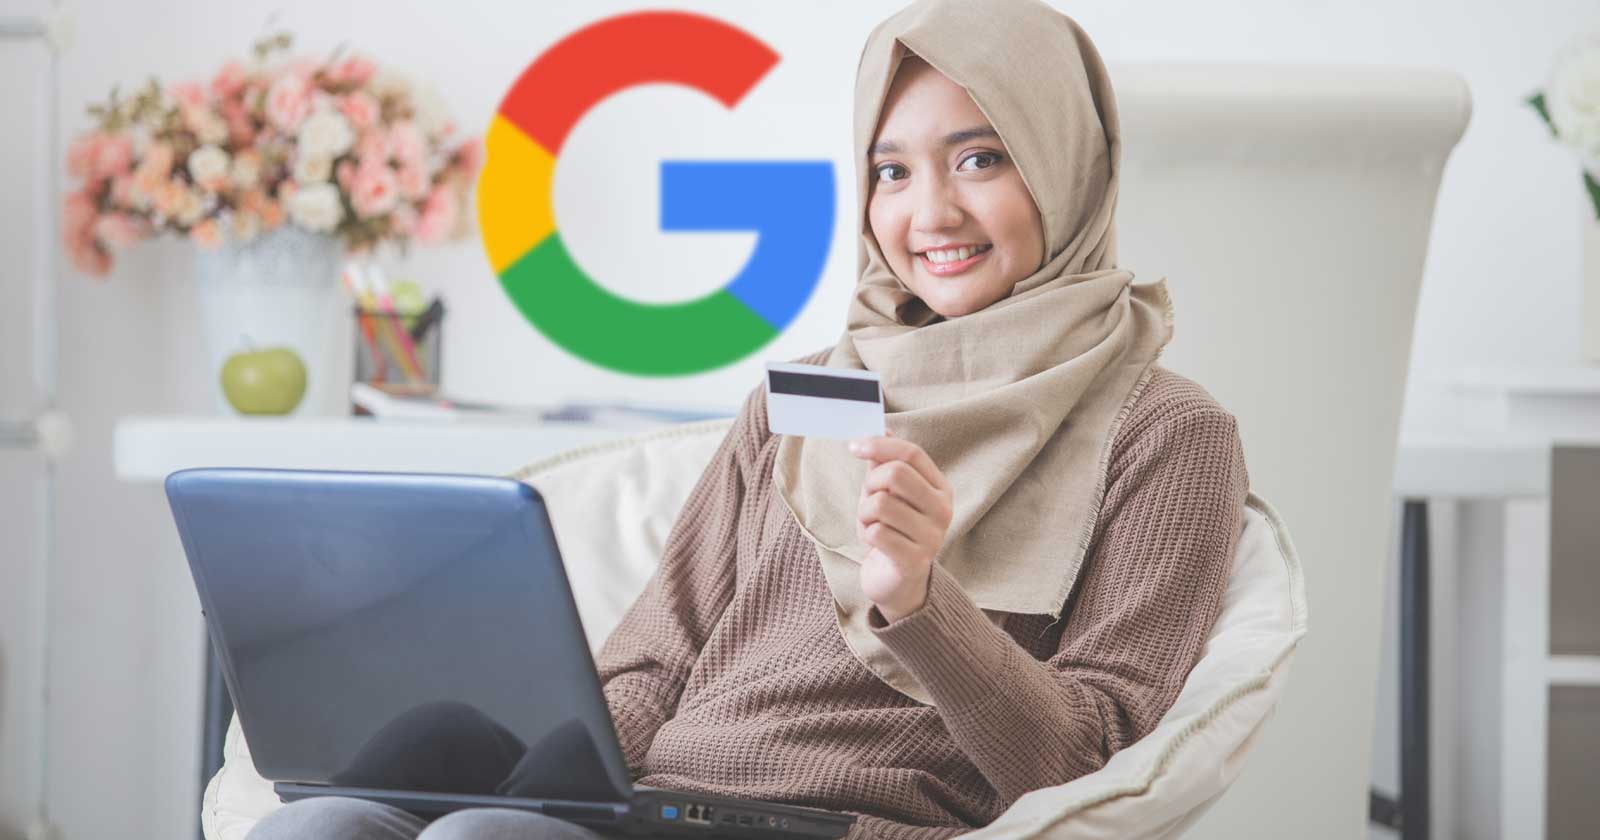 Image of an Indonesian Muslim woman shopping online and the Google logo behind her